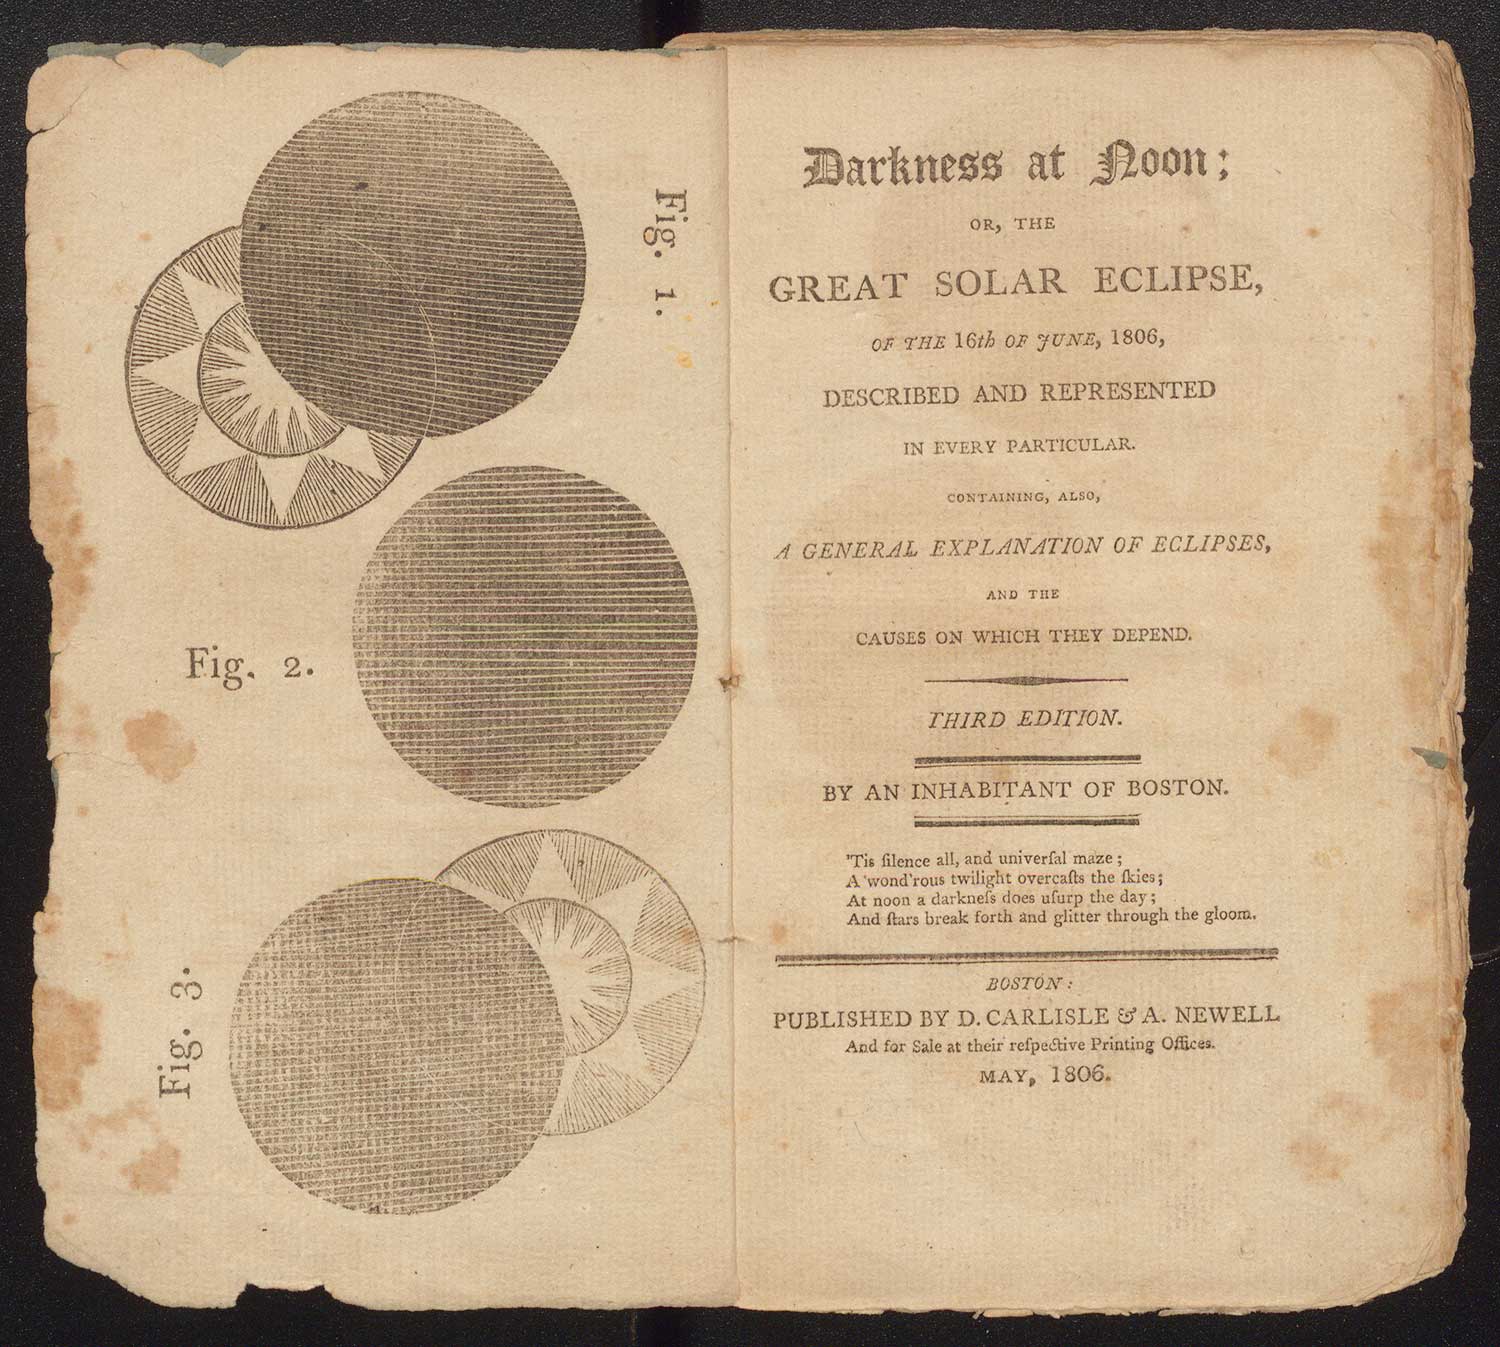 Newell, Andrew, Darkness at Noon: or, the Great Solar Eclipse of the 16th of June, 1806. Boston: D. Carlisle & A. Newell, 1806.